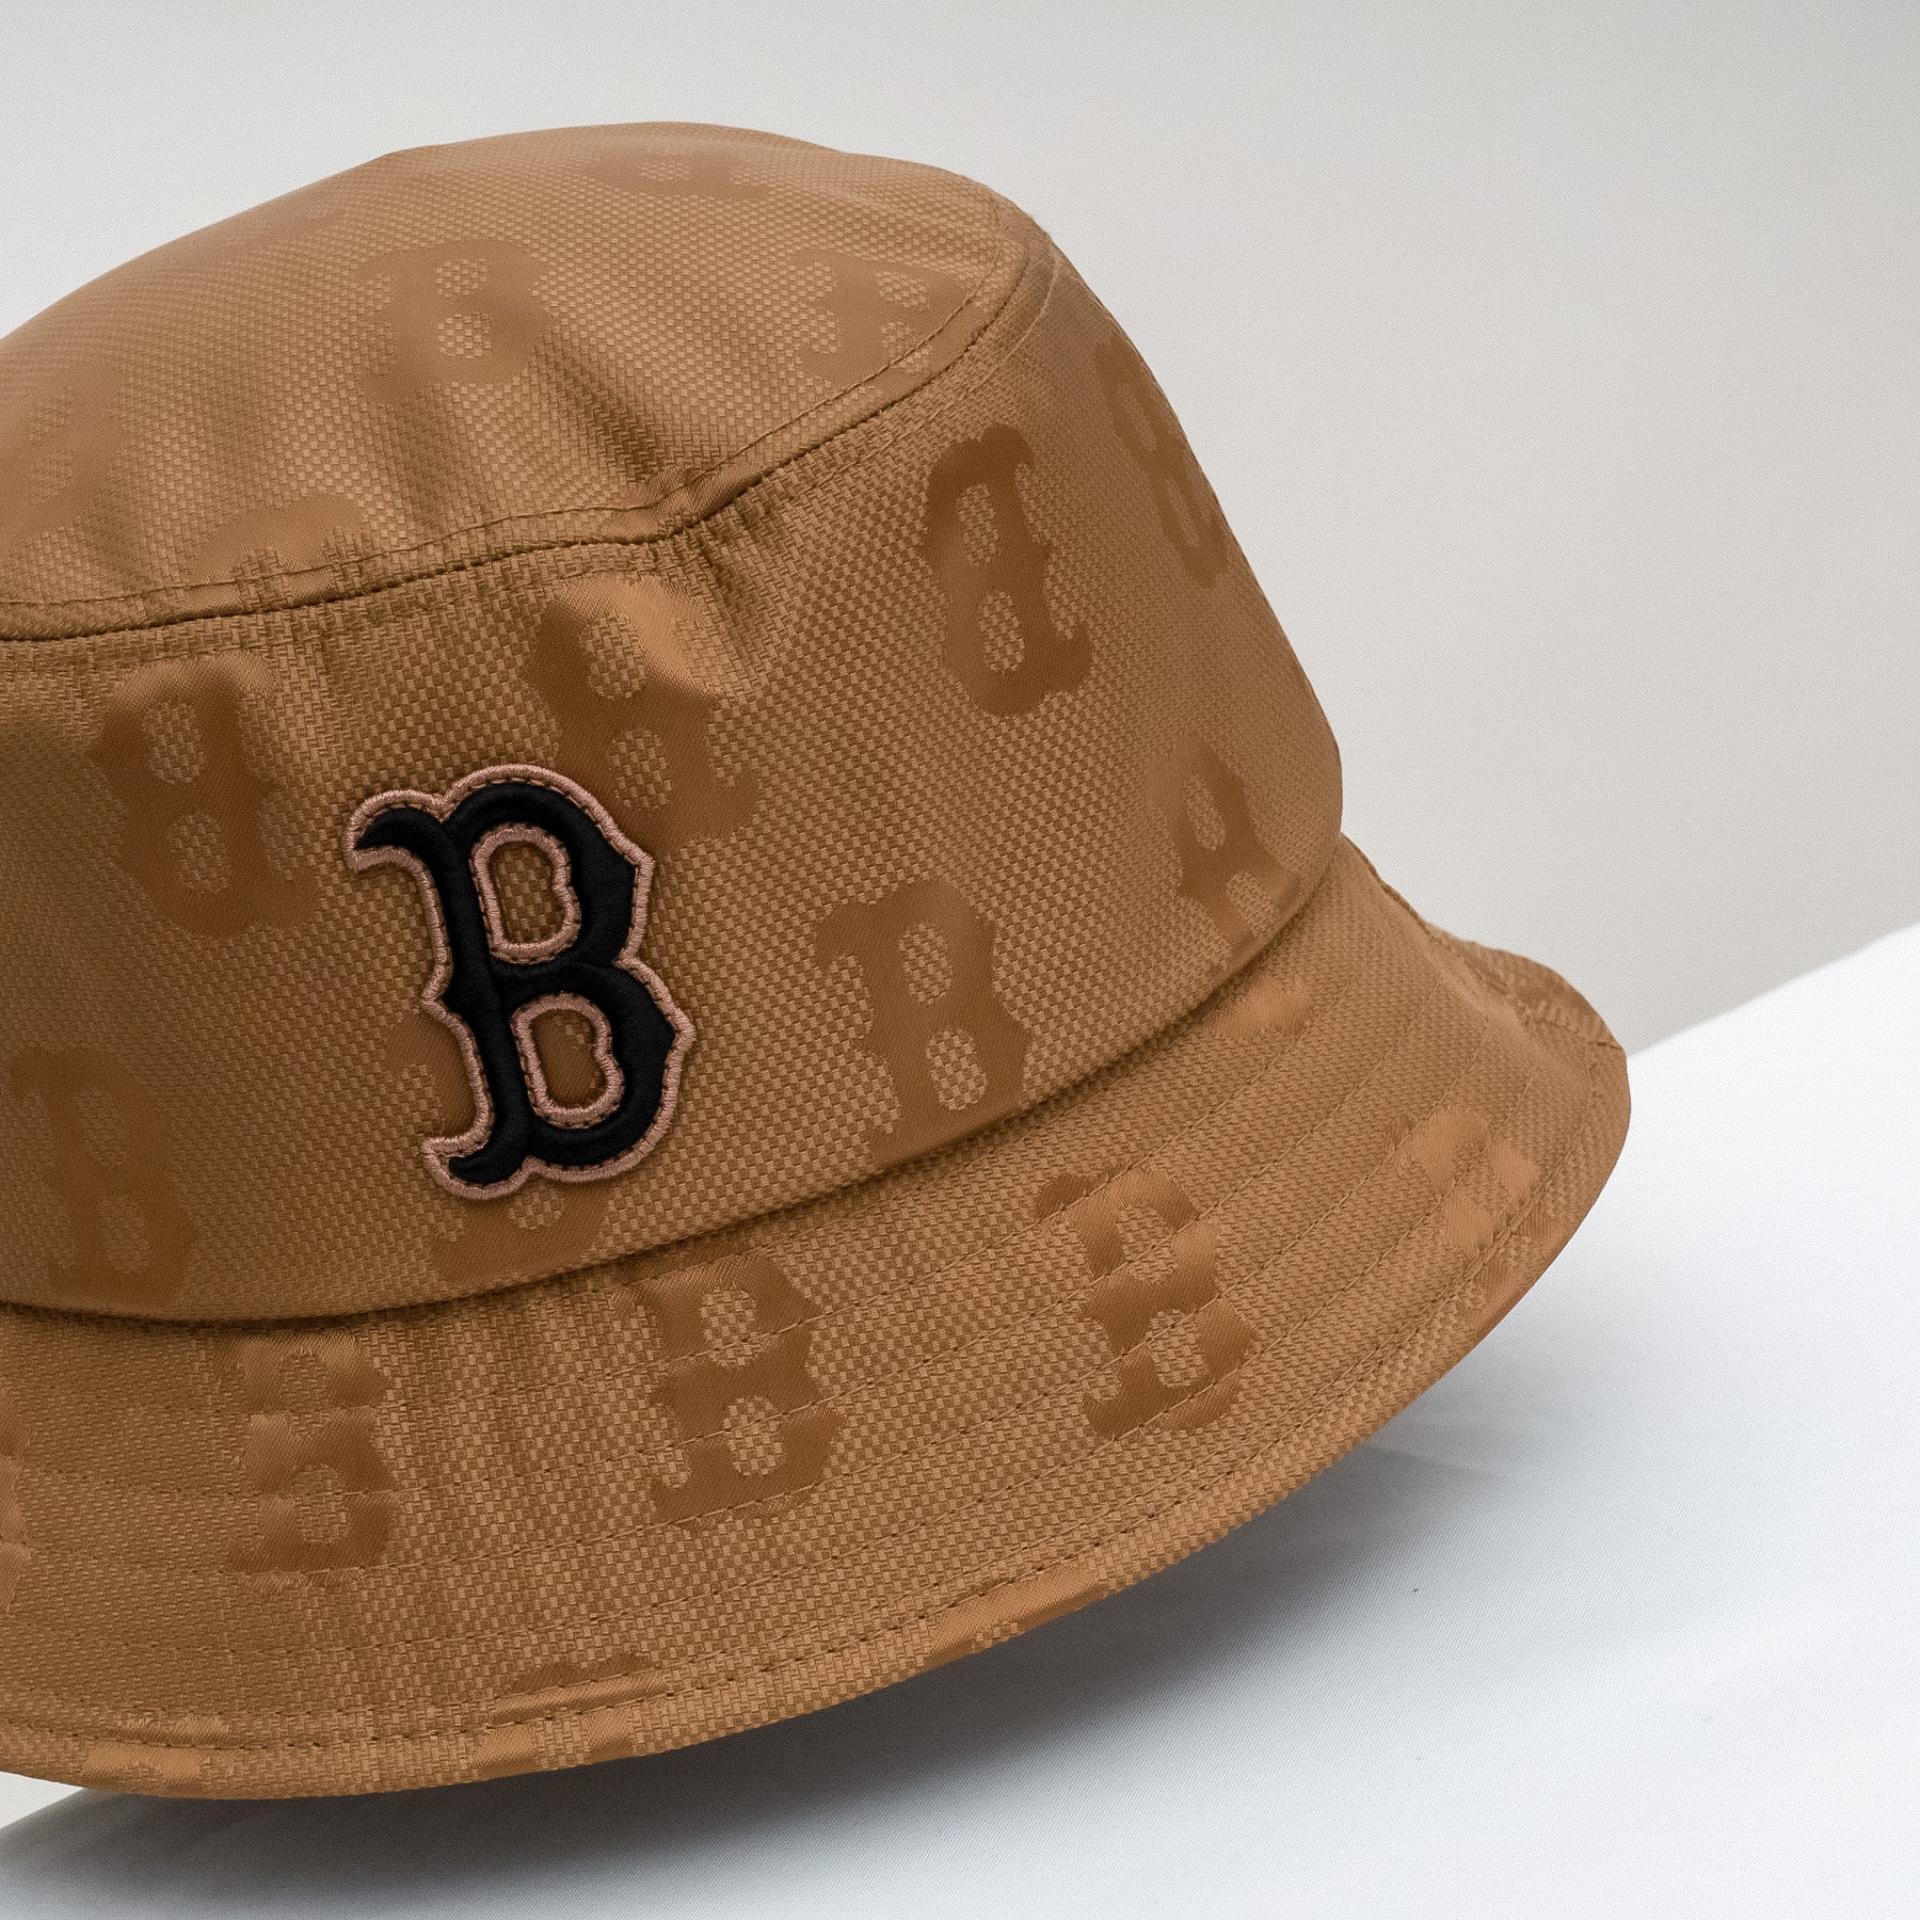 MLB TriTone Brown 59Fifty Fitted Hat Collection by MLB x New Era   Strictly Fitteds